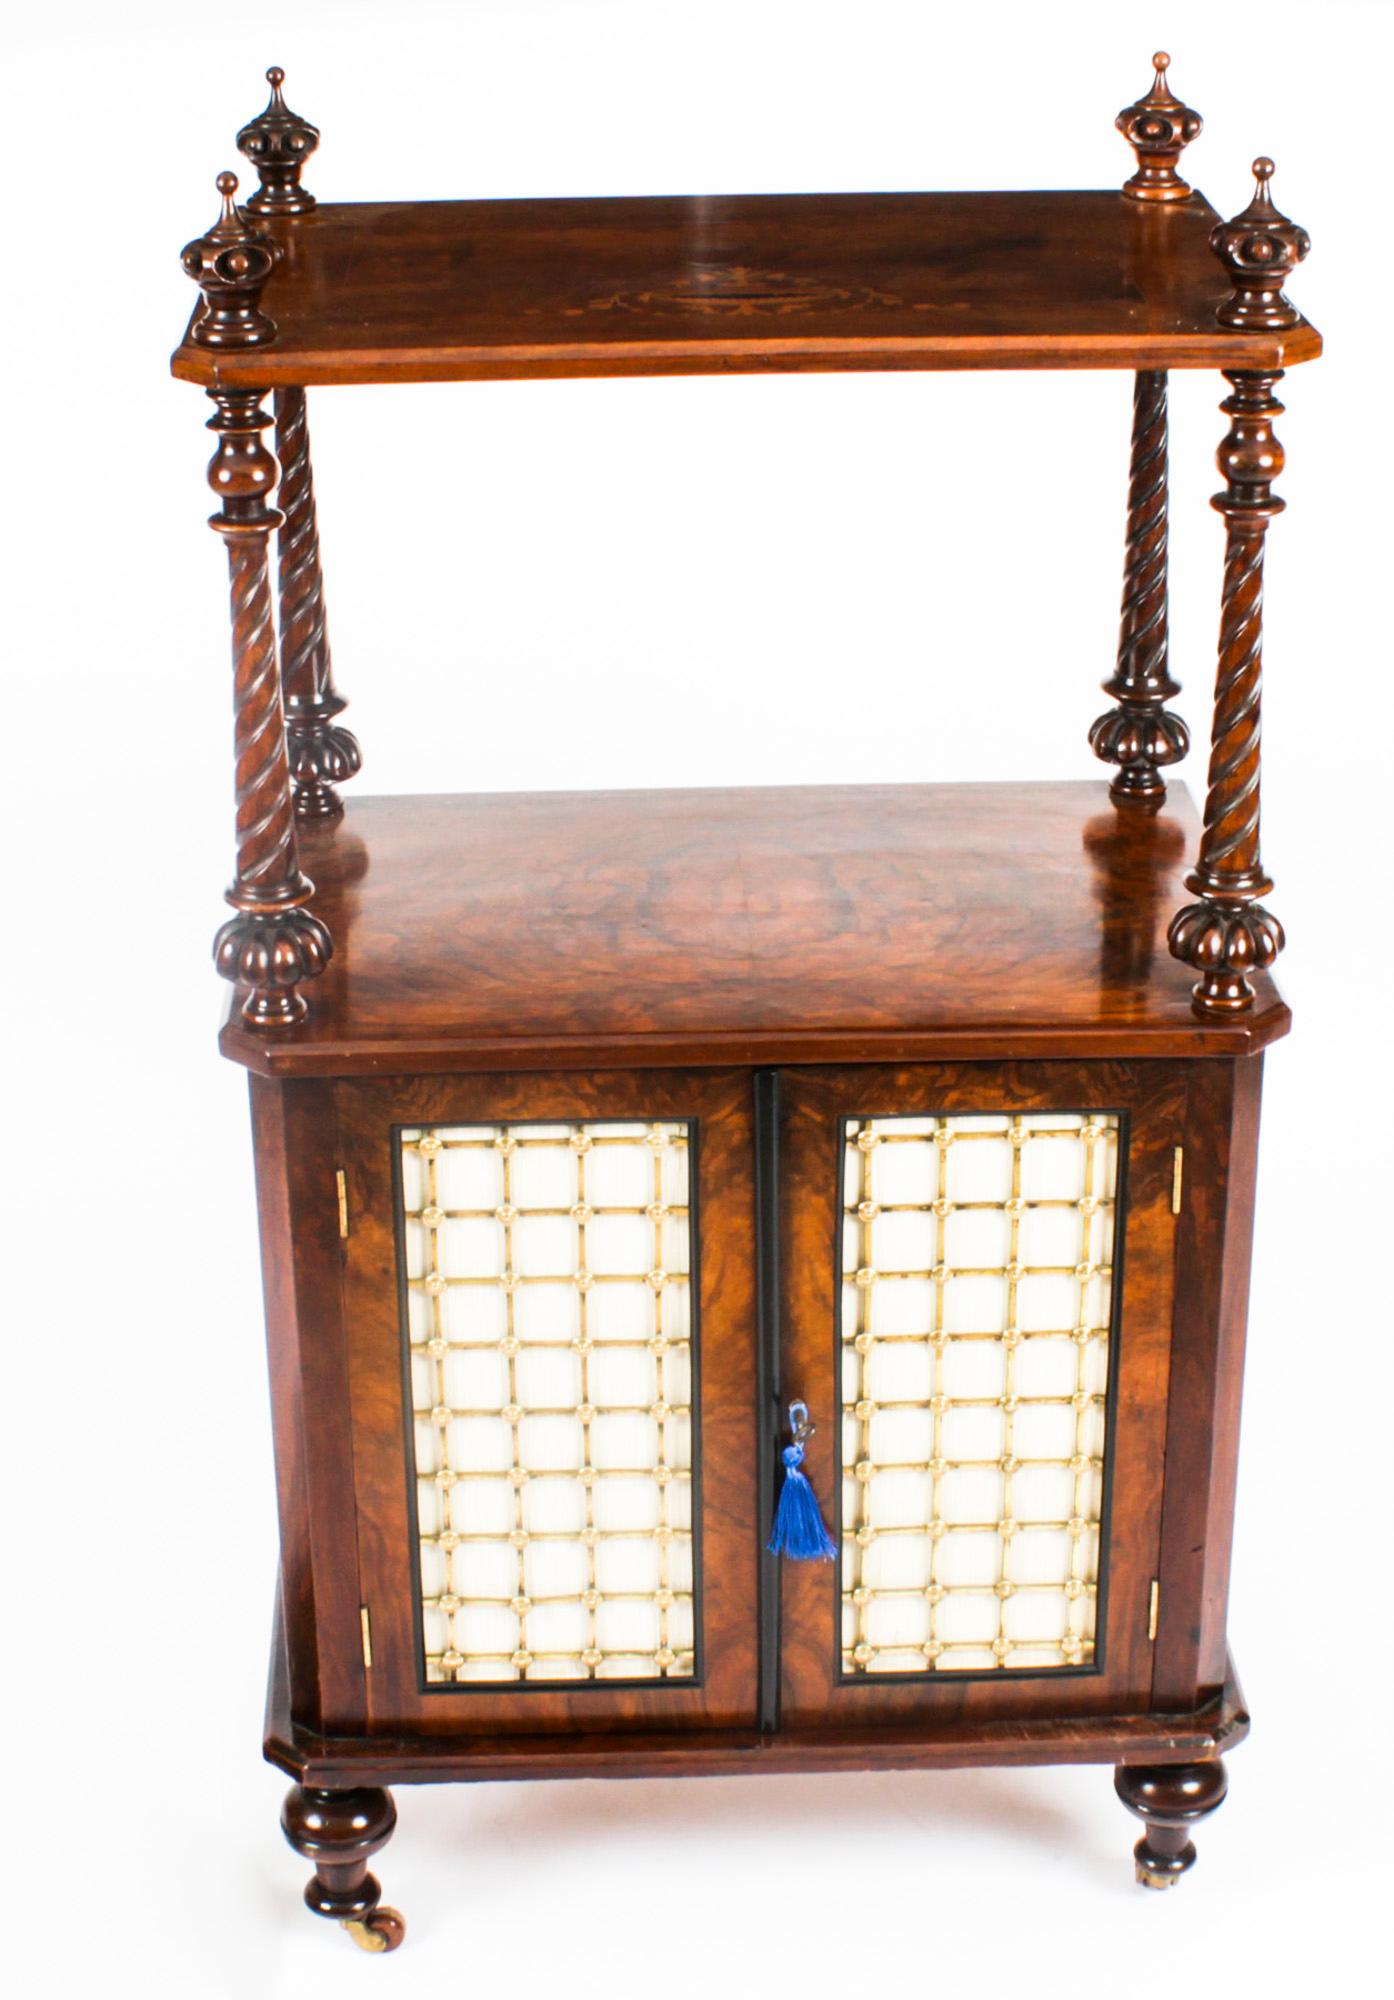 This is a beautiful antique Victorian burr walnut and inlaid music cabinet, Circa 1860 in date.

The inlaid upper tier is supported by turned and carved walnut columns. The music cupboard with a pair of doors opening to reveal shelves. The door